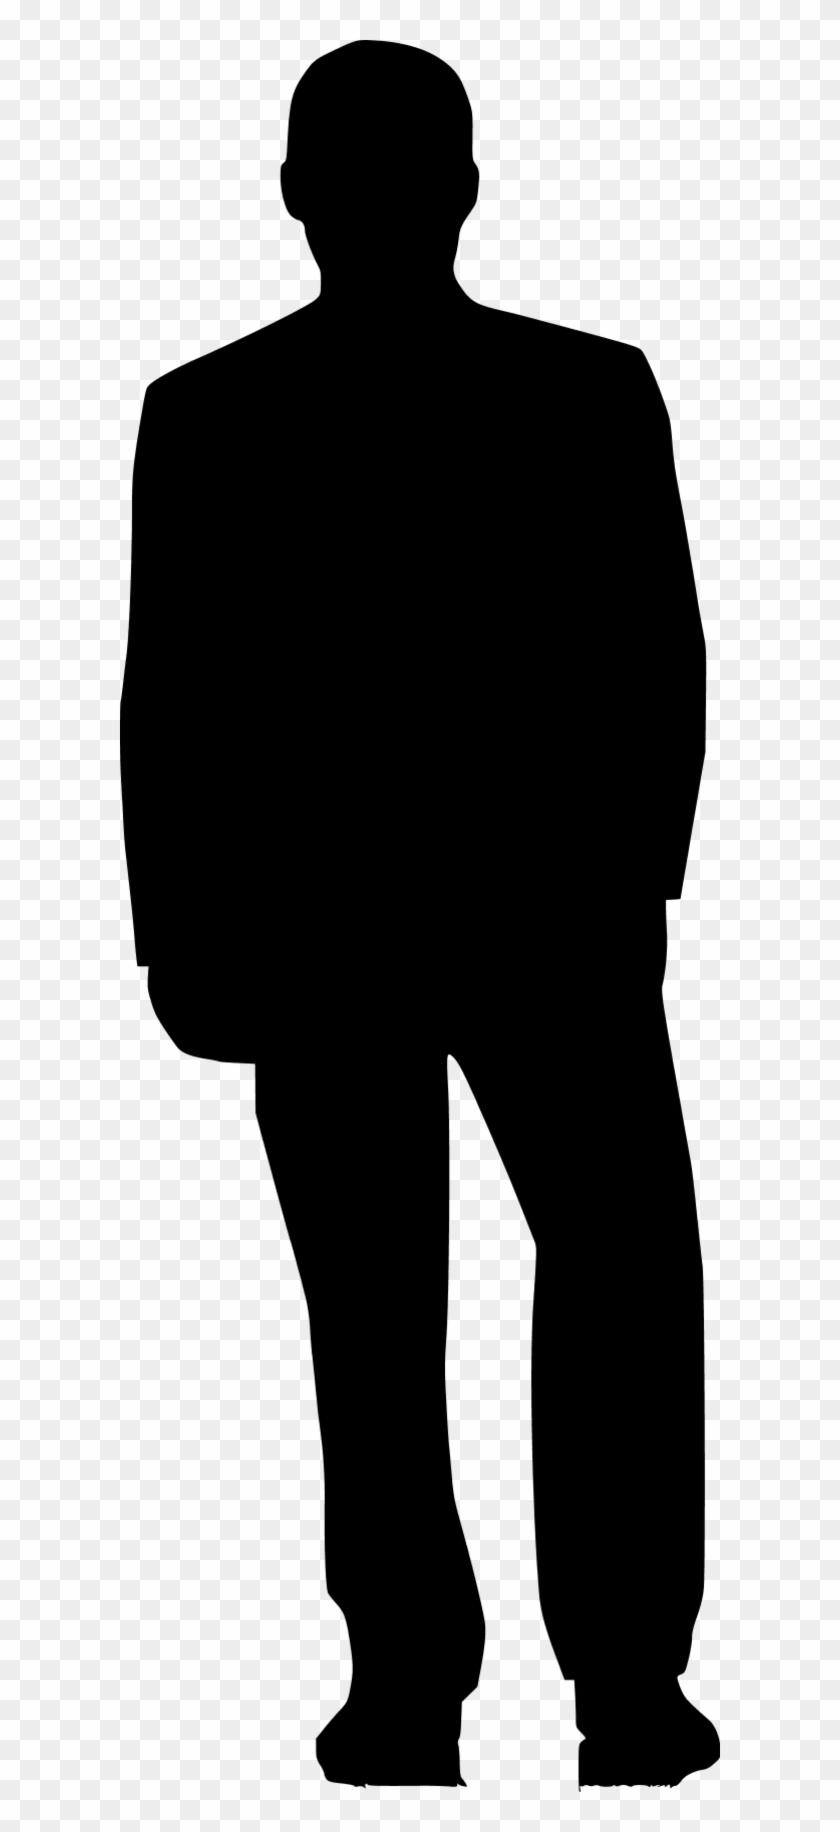 600 X 1752 3 0 - People Silhouette Back Png Clipart